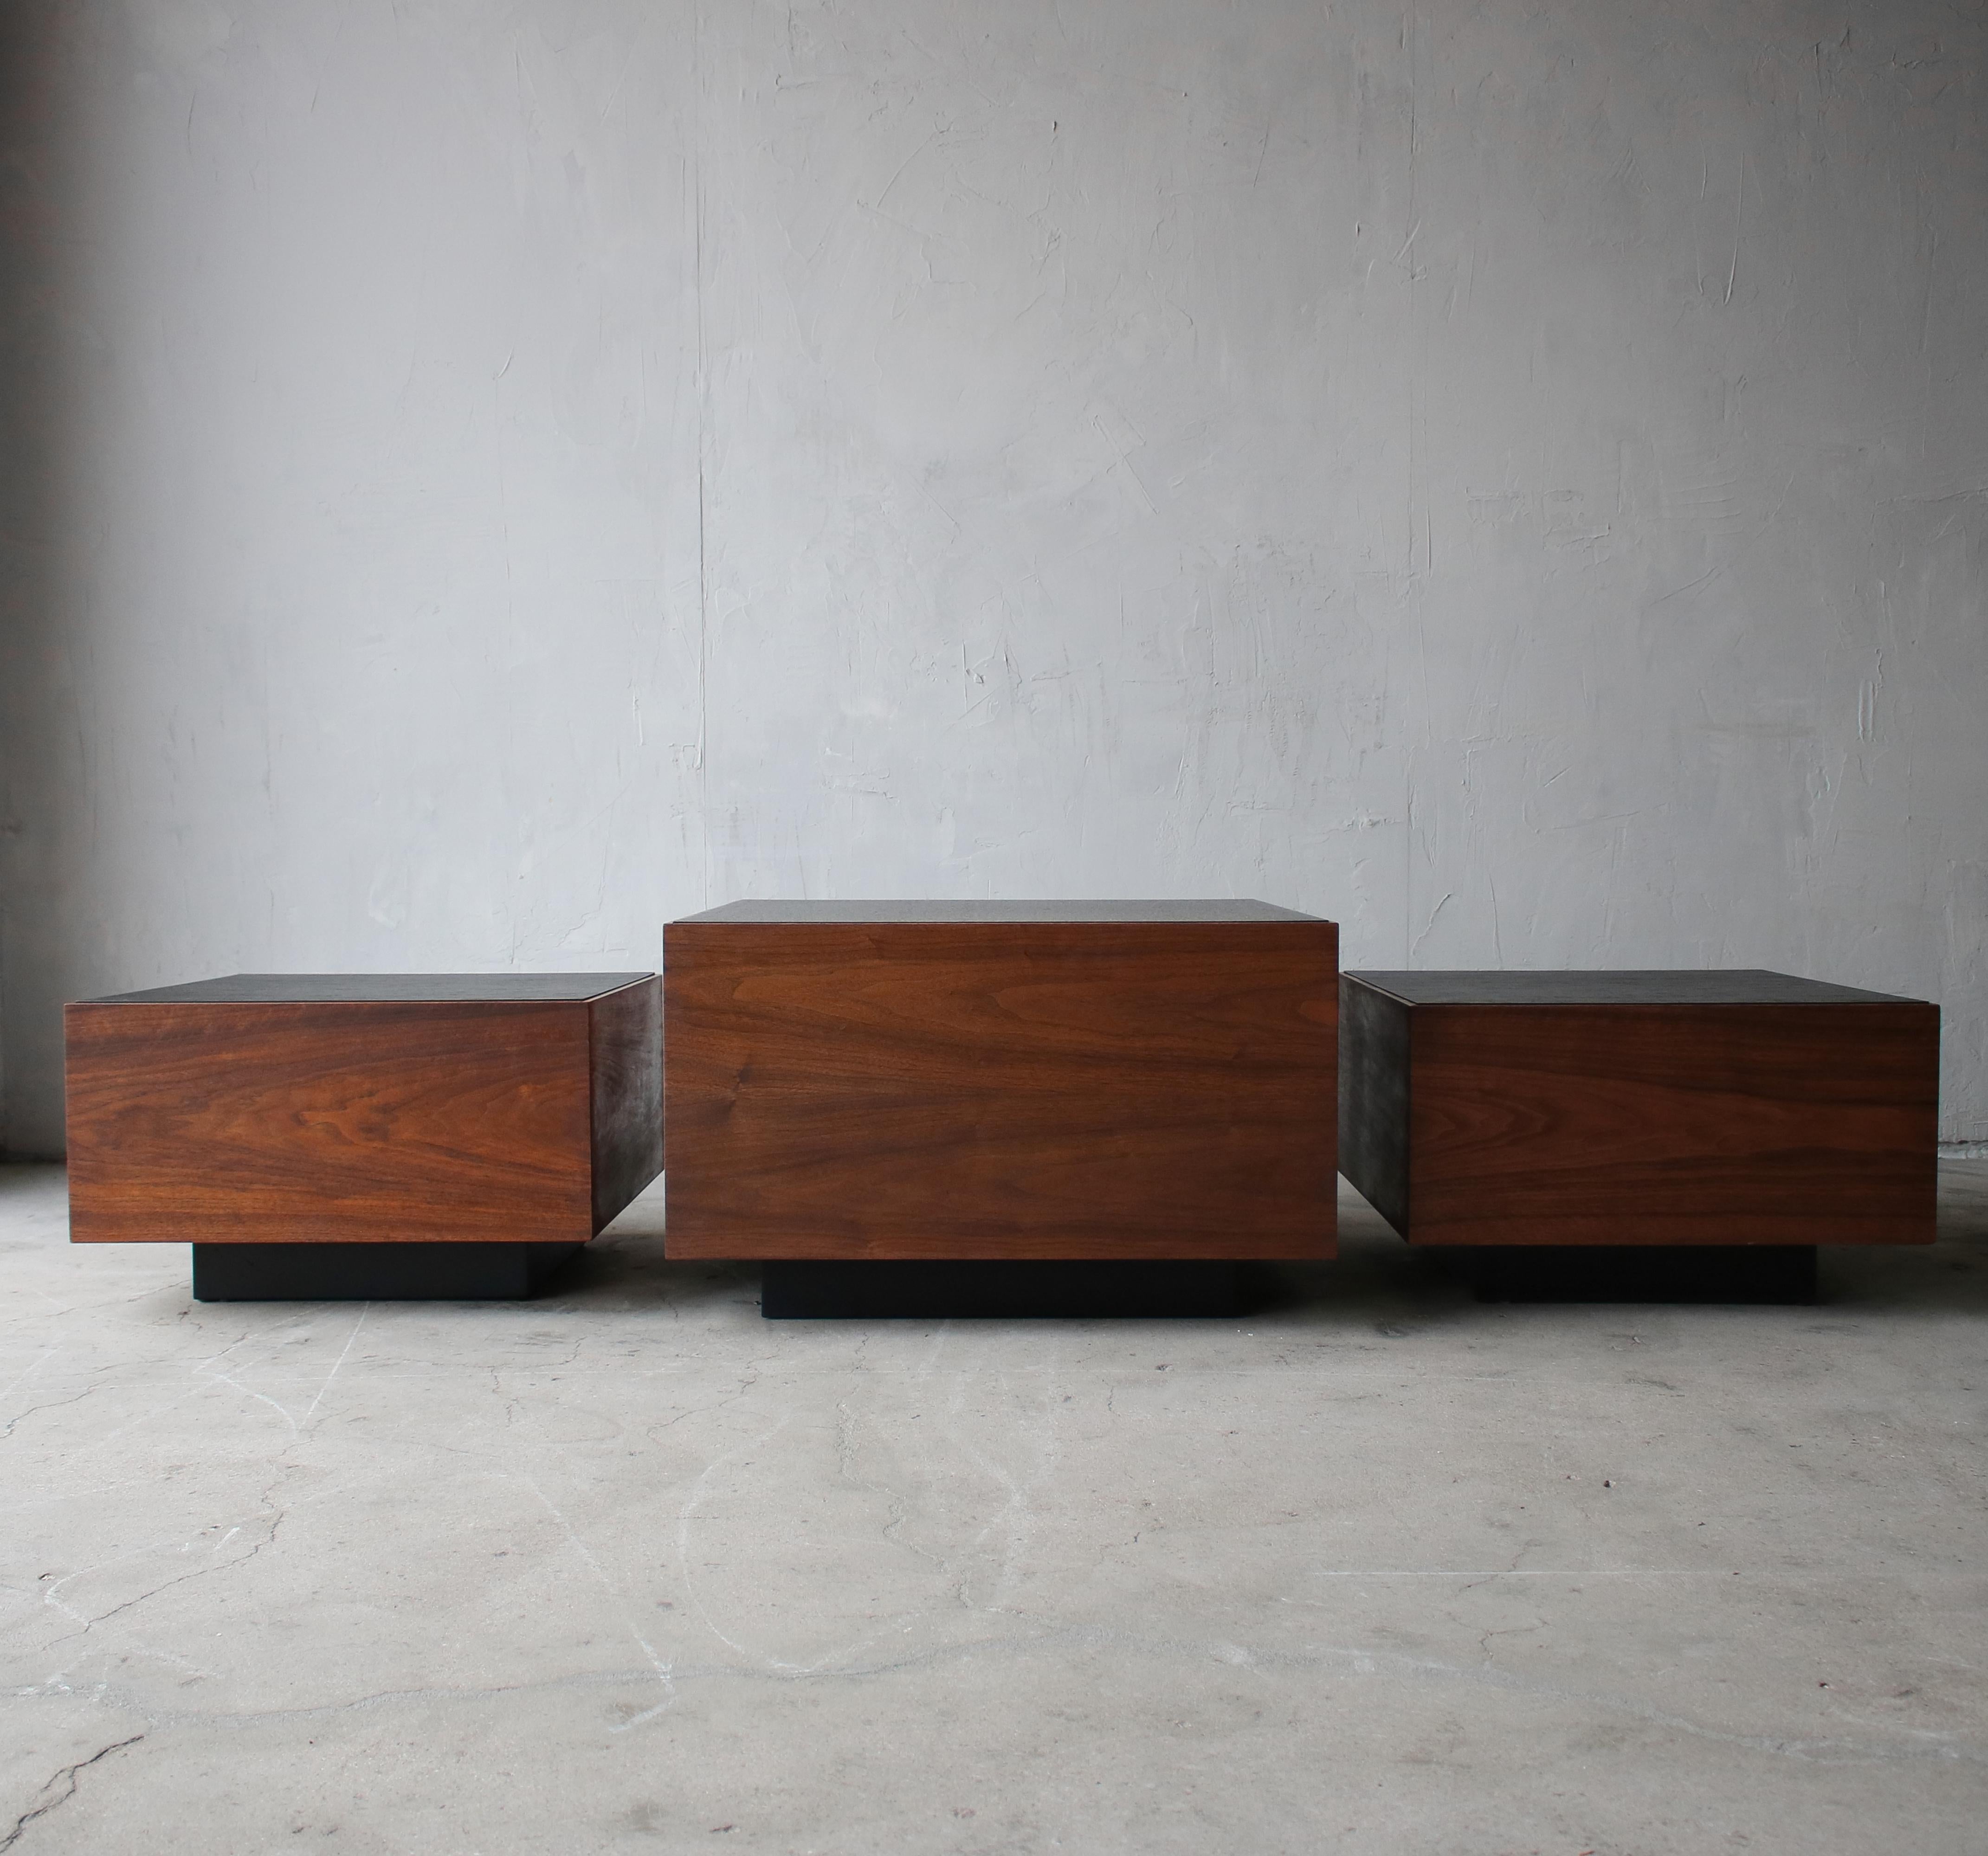 Nice set of midcentury walnut cube tables with black faux slate tops and plinth bases. One small coffee table and 2 side tables. Would be perfect used together as a large coffee table. 

Tables are in great condition showing very little